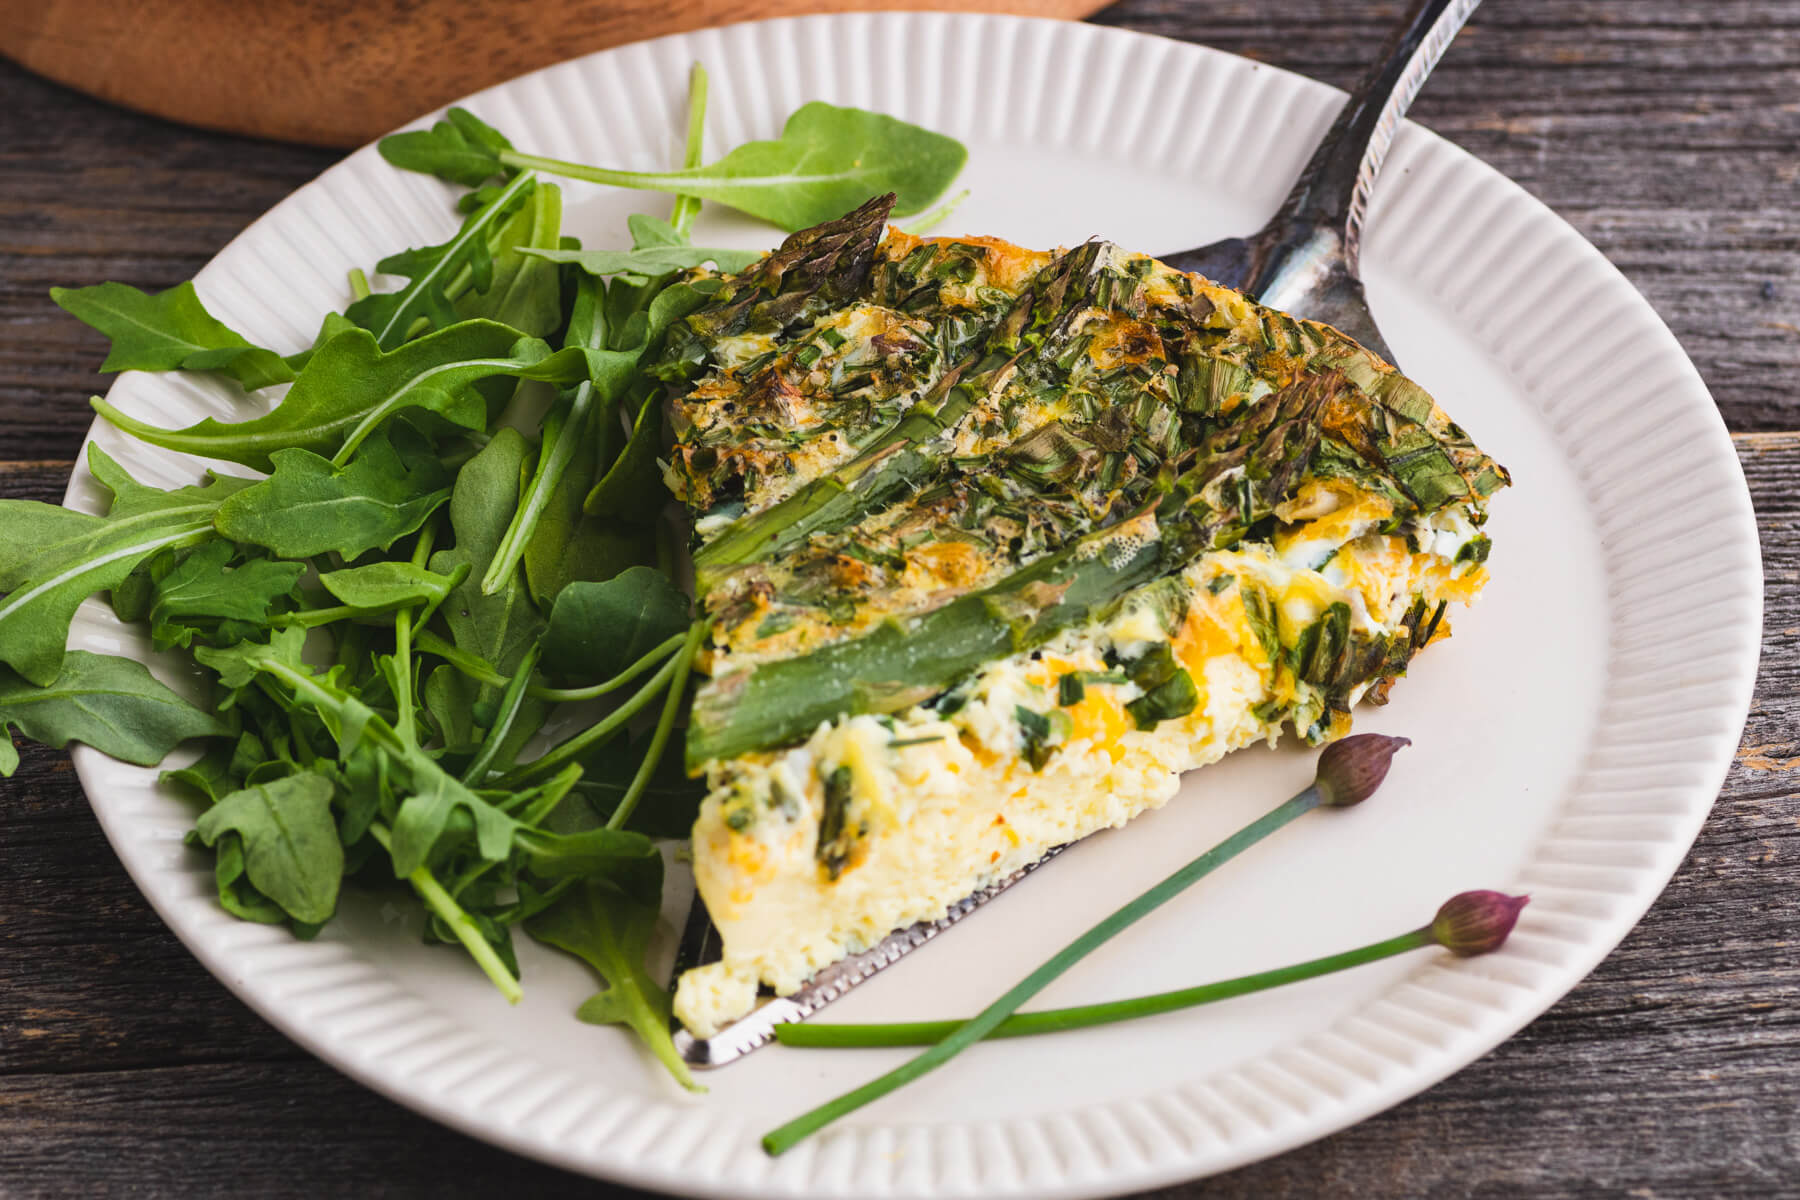 A silver pie server under a slice of Asparagus quiche with wild ramps on a white plate.